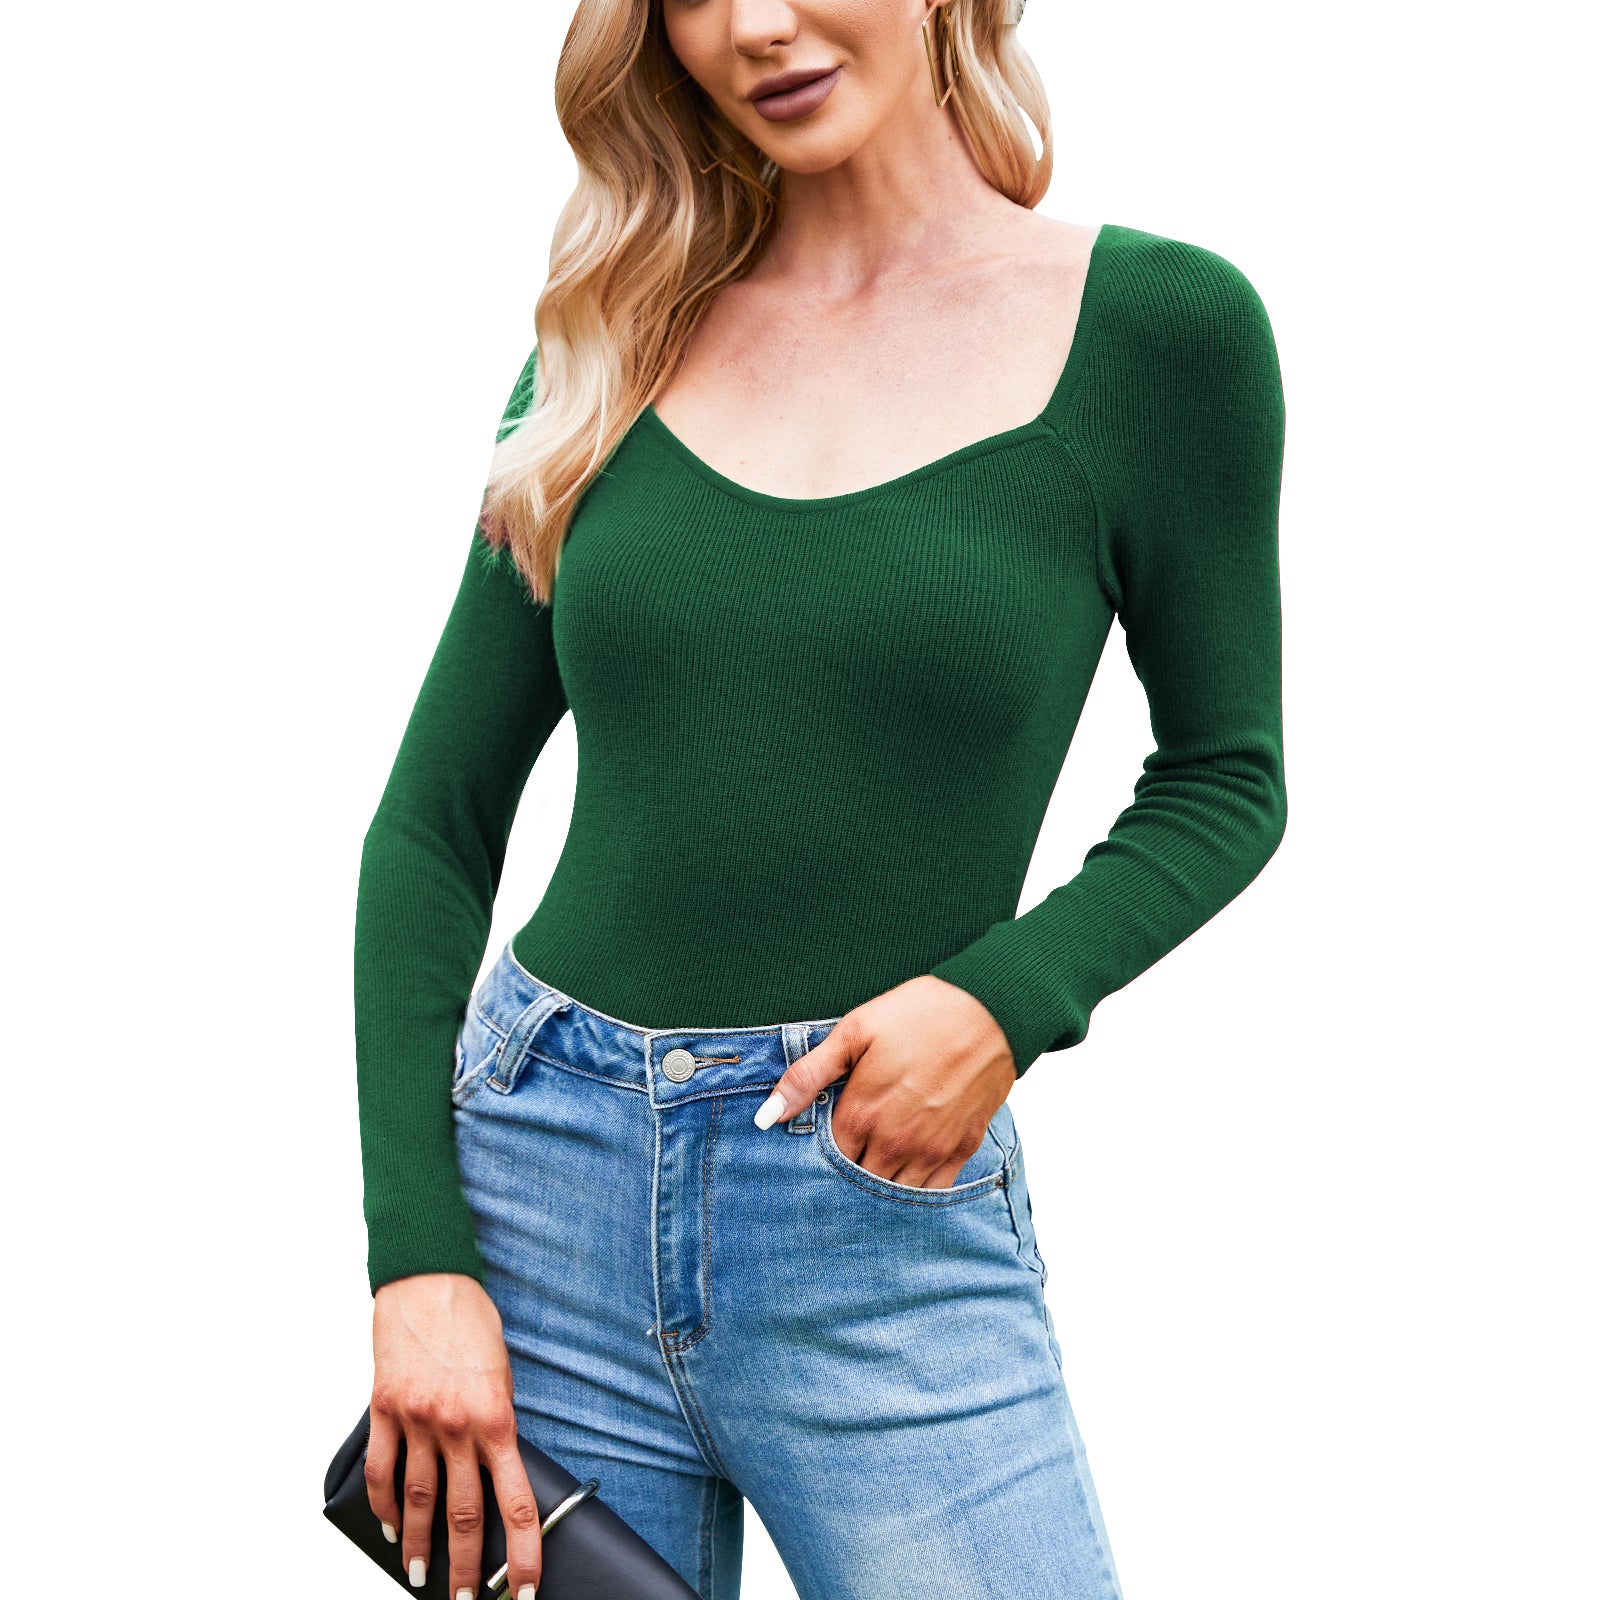 Exlura Women's Square Neck Ribbed Knitted Crop Sweater Long